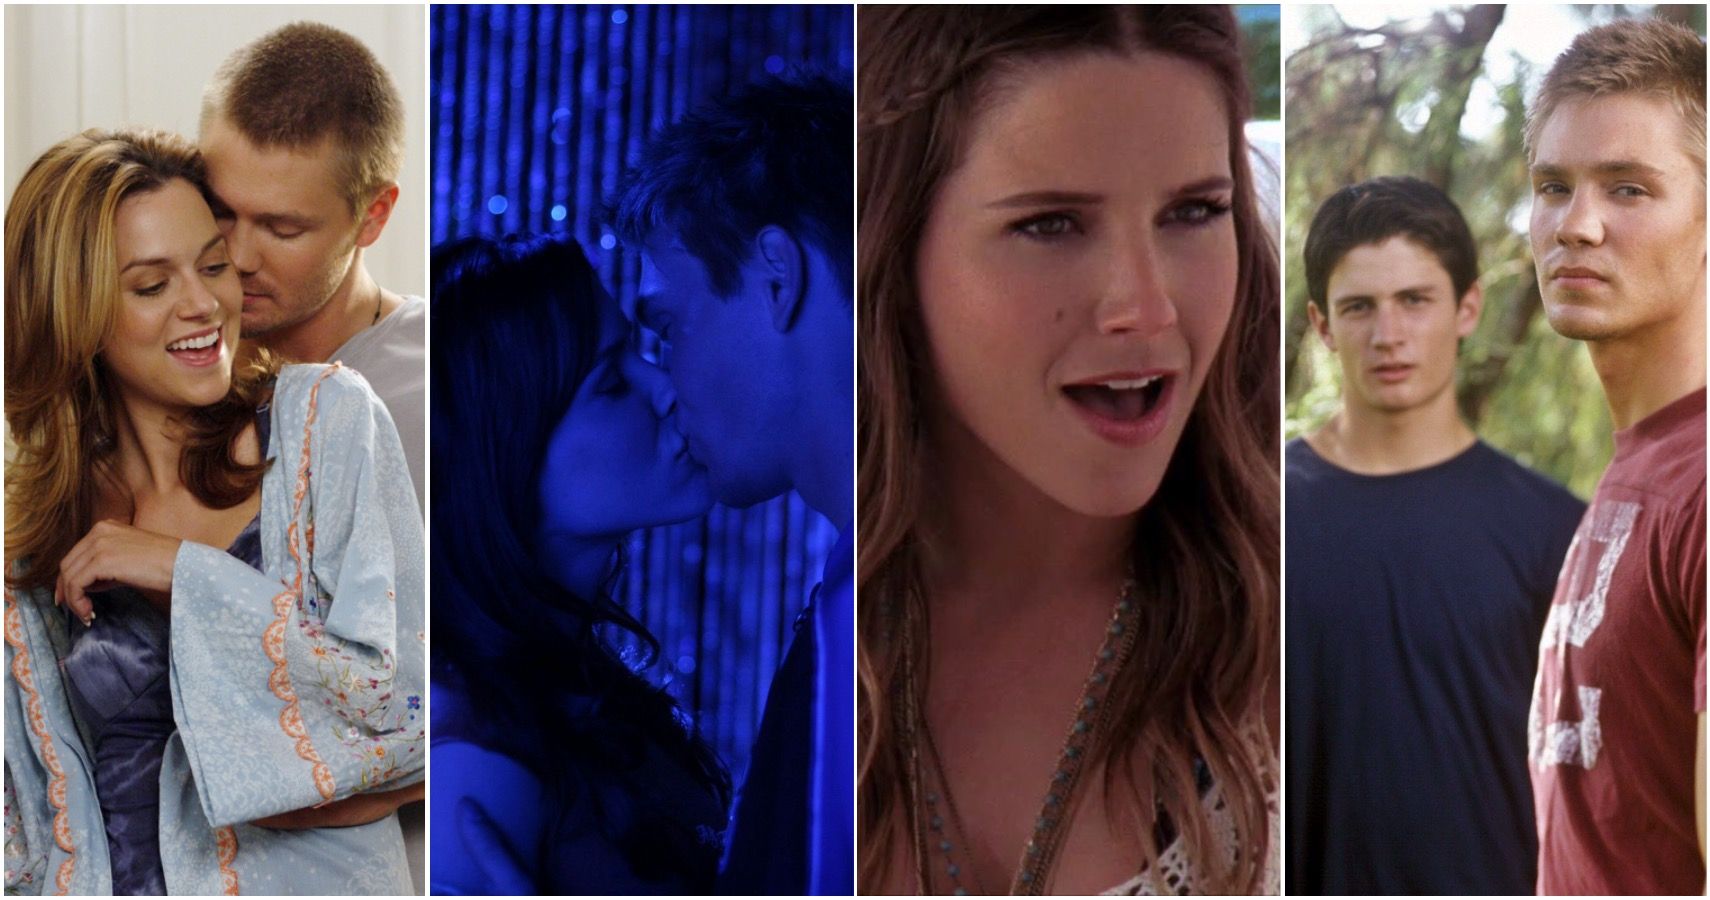 10 BehindTheScenes Facts About One Tree Hill You Didn't Know